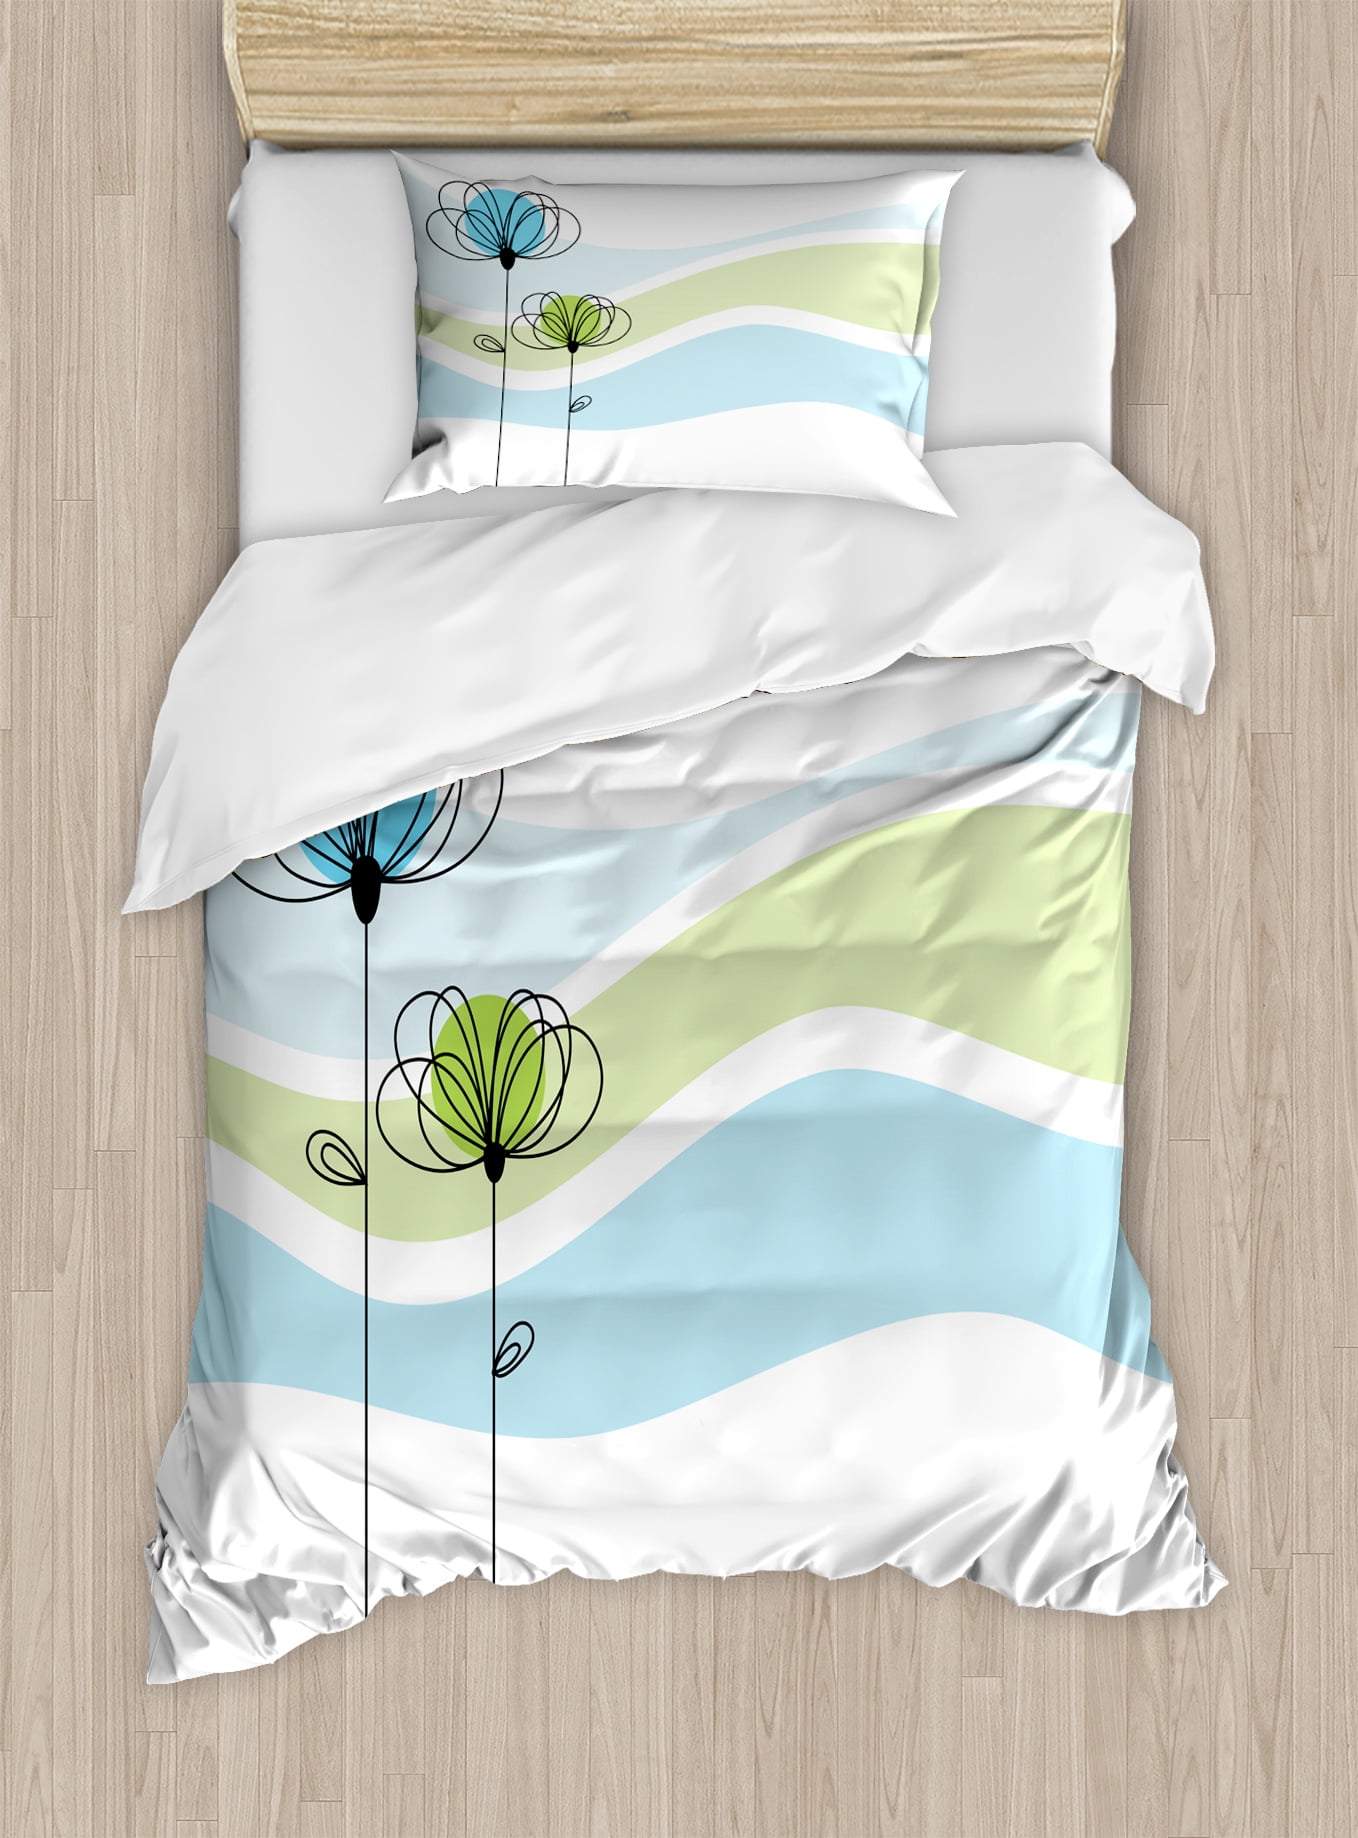 Doodle Duvet Cover Set Summer Flowers With Cute Colors And Wave